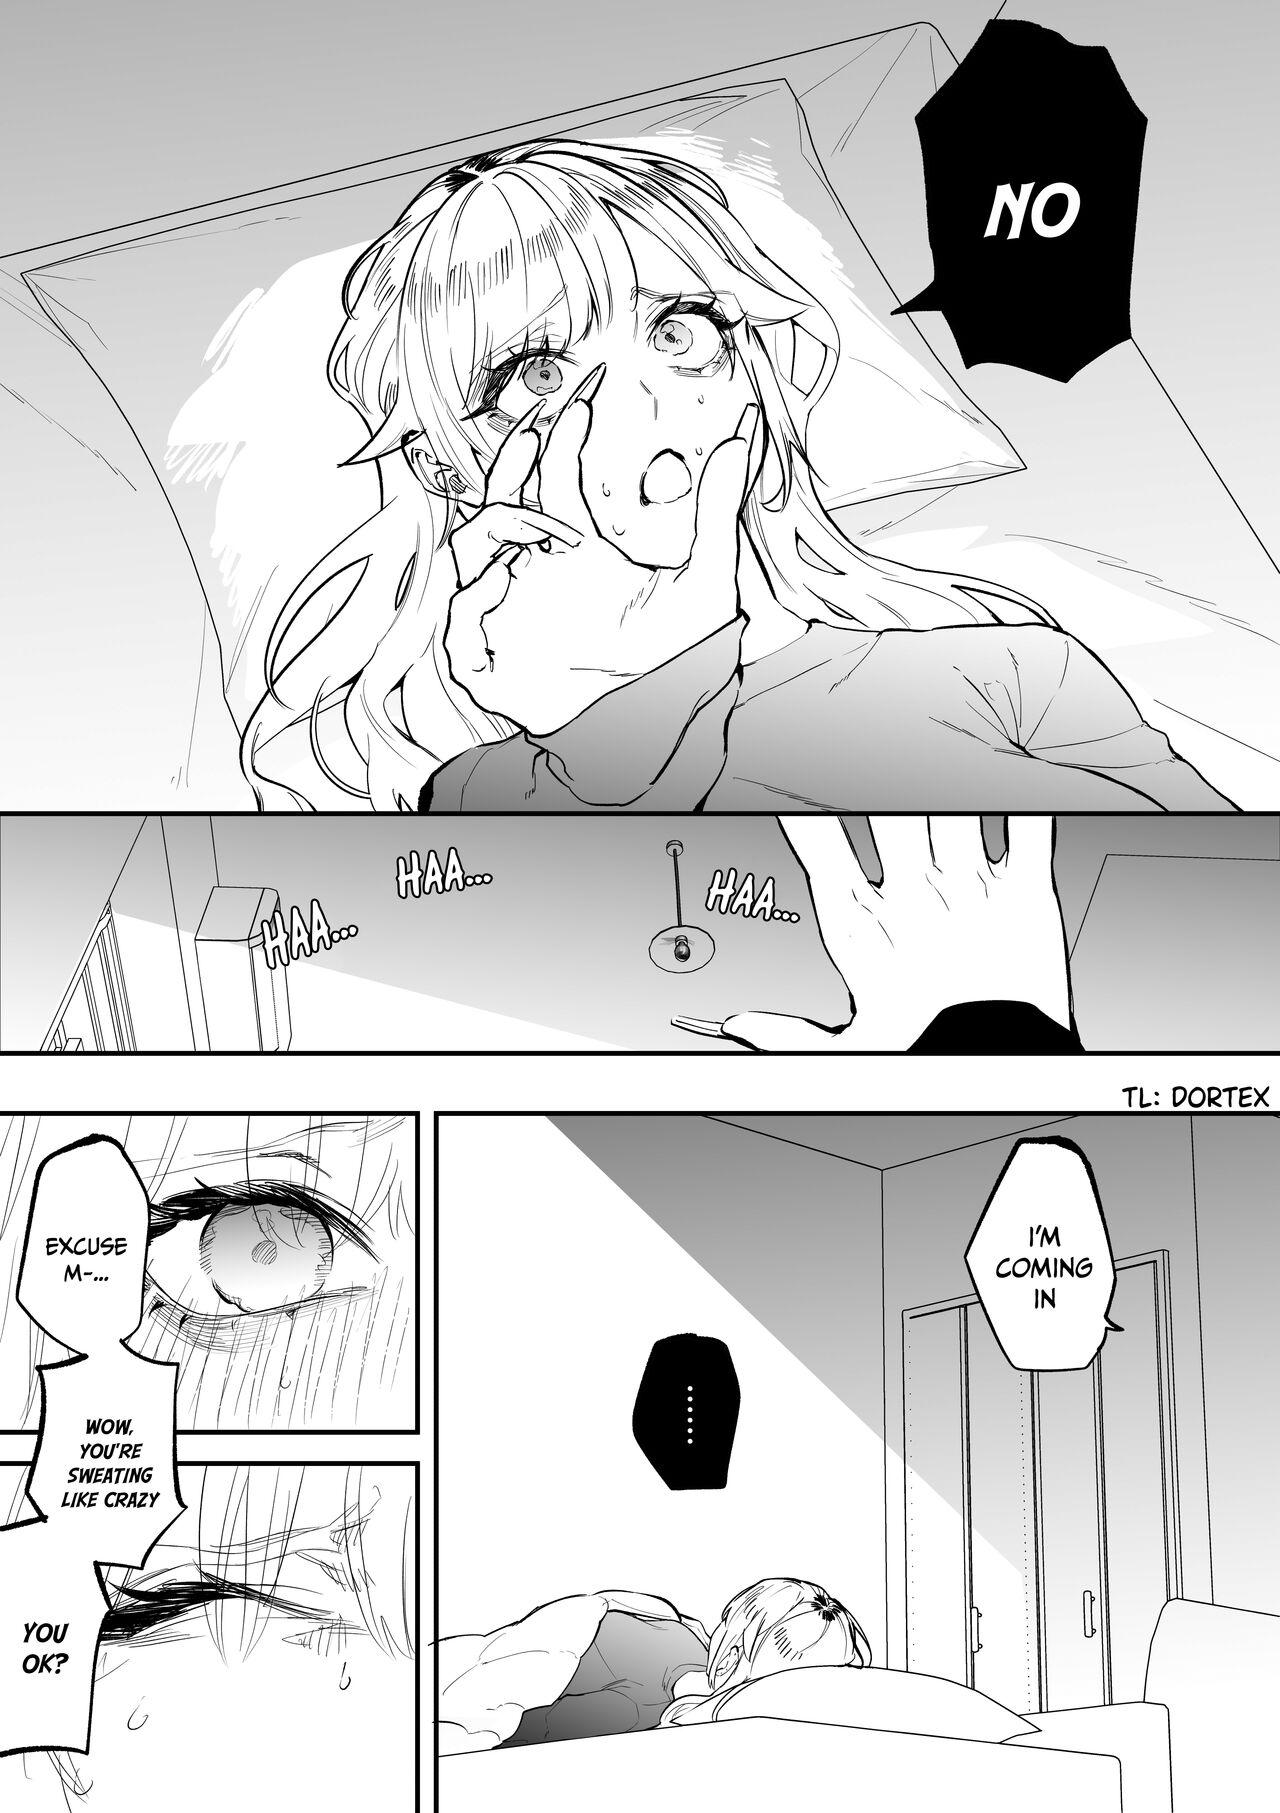 The Day I Decided to Make My Cheeky Gyaru Sister Understand in My Own Way (Fanbox 18+ Content) - Ch. 2.6 - In a Dream 4